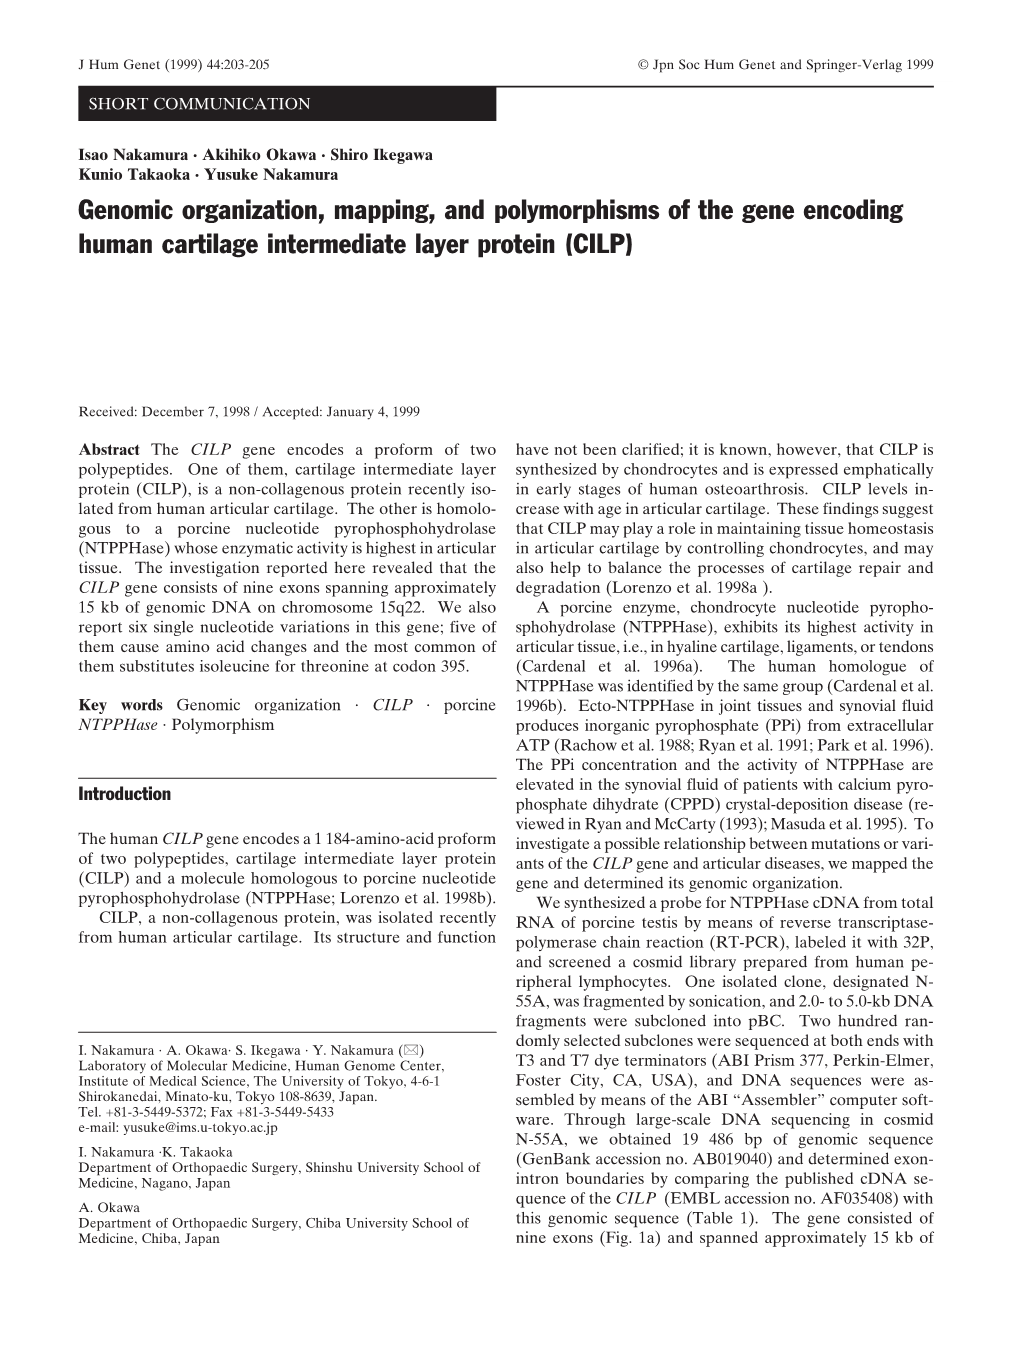 Genomic Organization, Mapping, and Polymorphisms of the Gene Encoding Human Cartilage Intermediate Layer Protein (CILP)